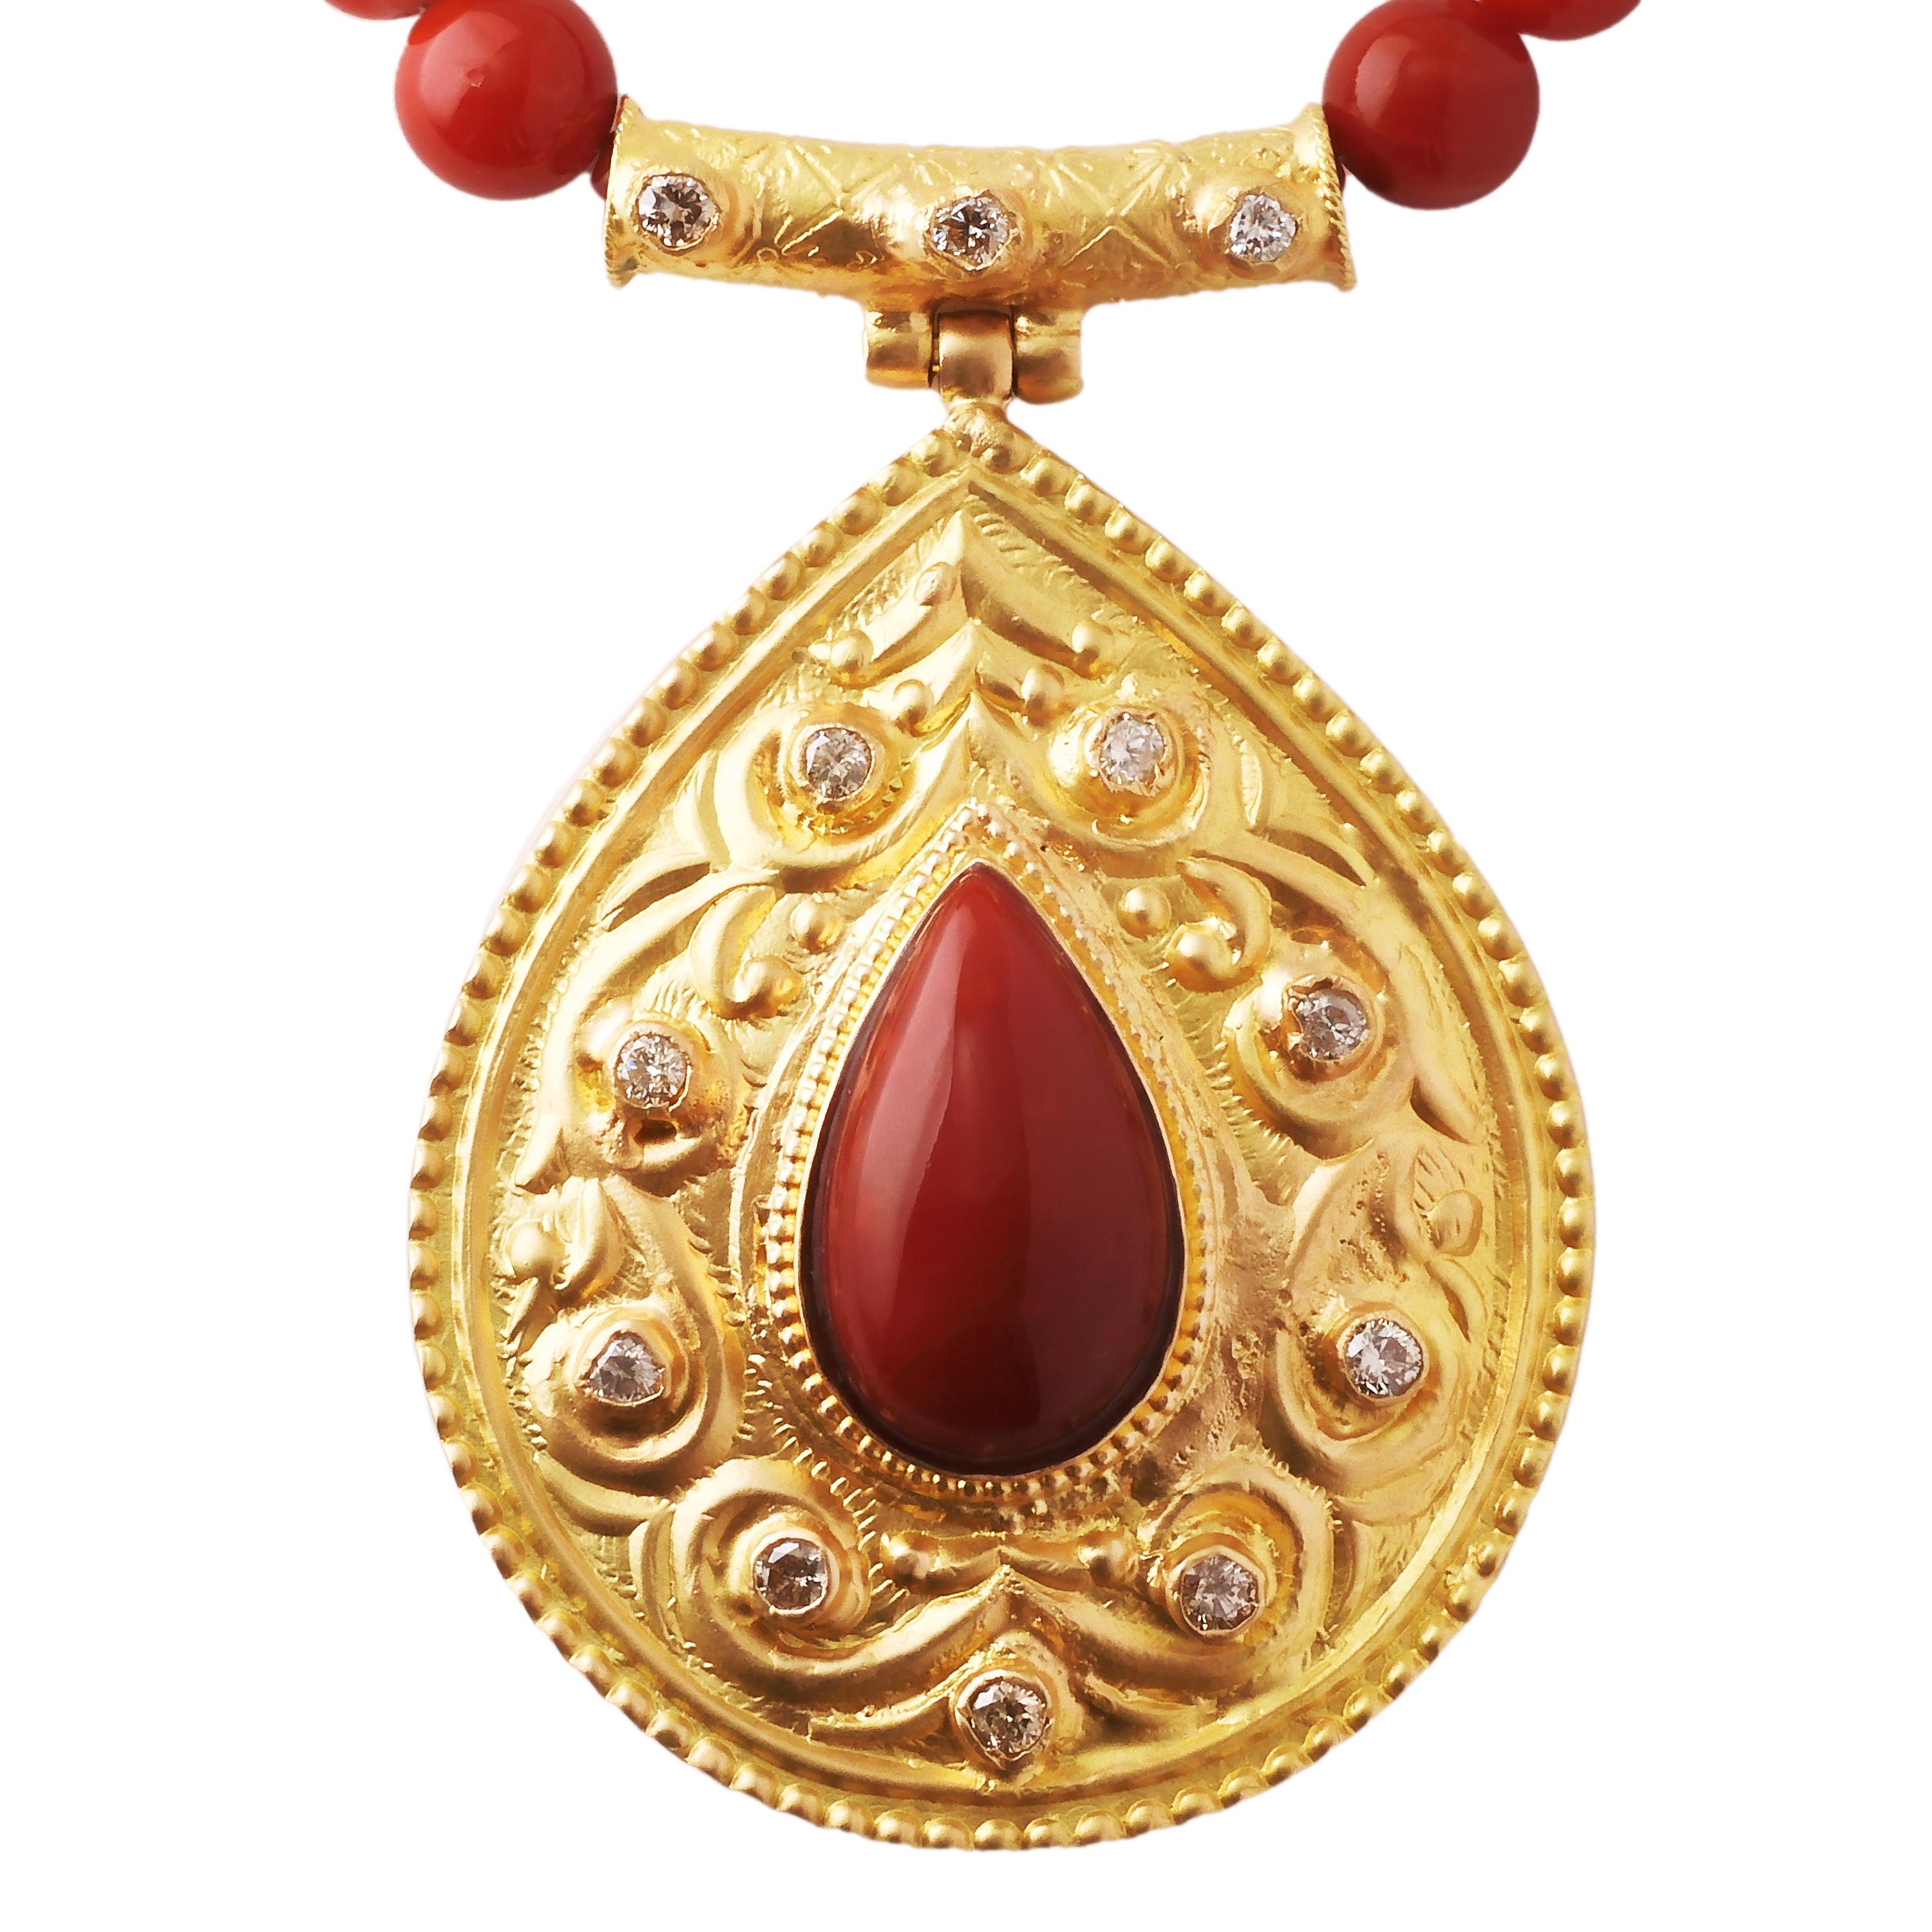 This is an 18 karat yellow gold pendant with a large pear shape Chiaka Sango (oxblood Coral) in the center. The 18 karat yellow gold pendant frame is engraved with an arabesque pattern with diamonds placed around the center.
The necklace is made of